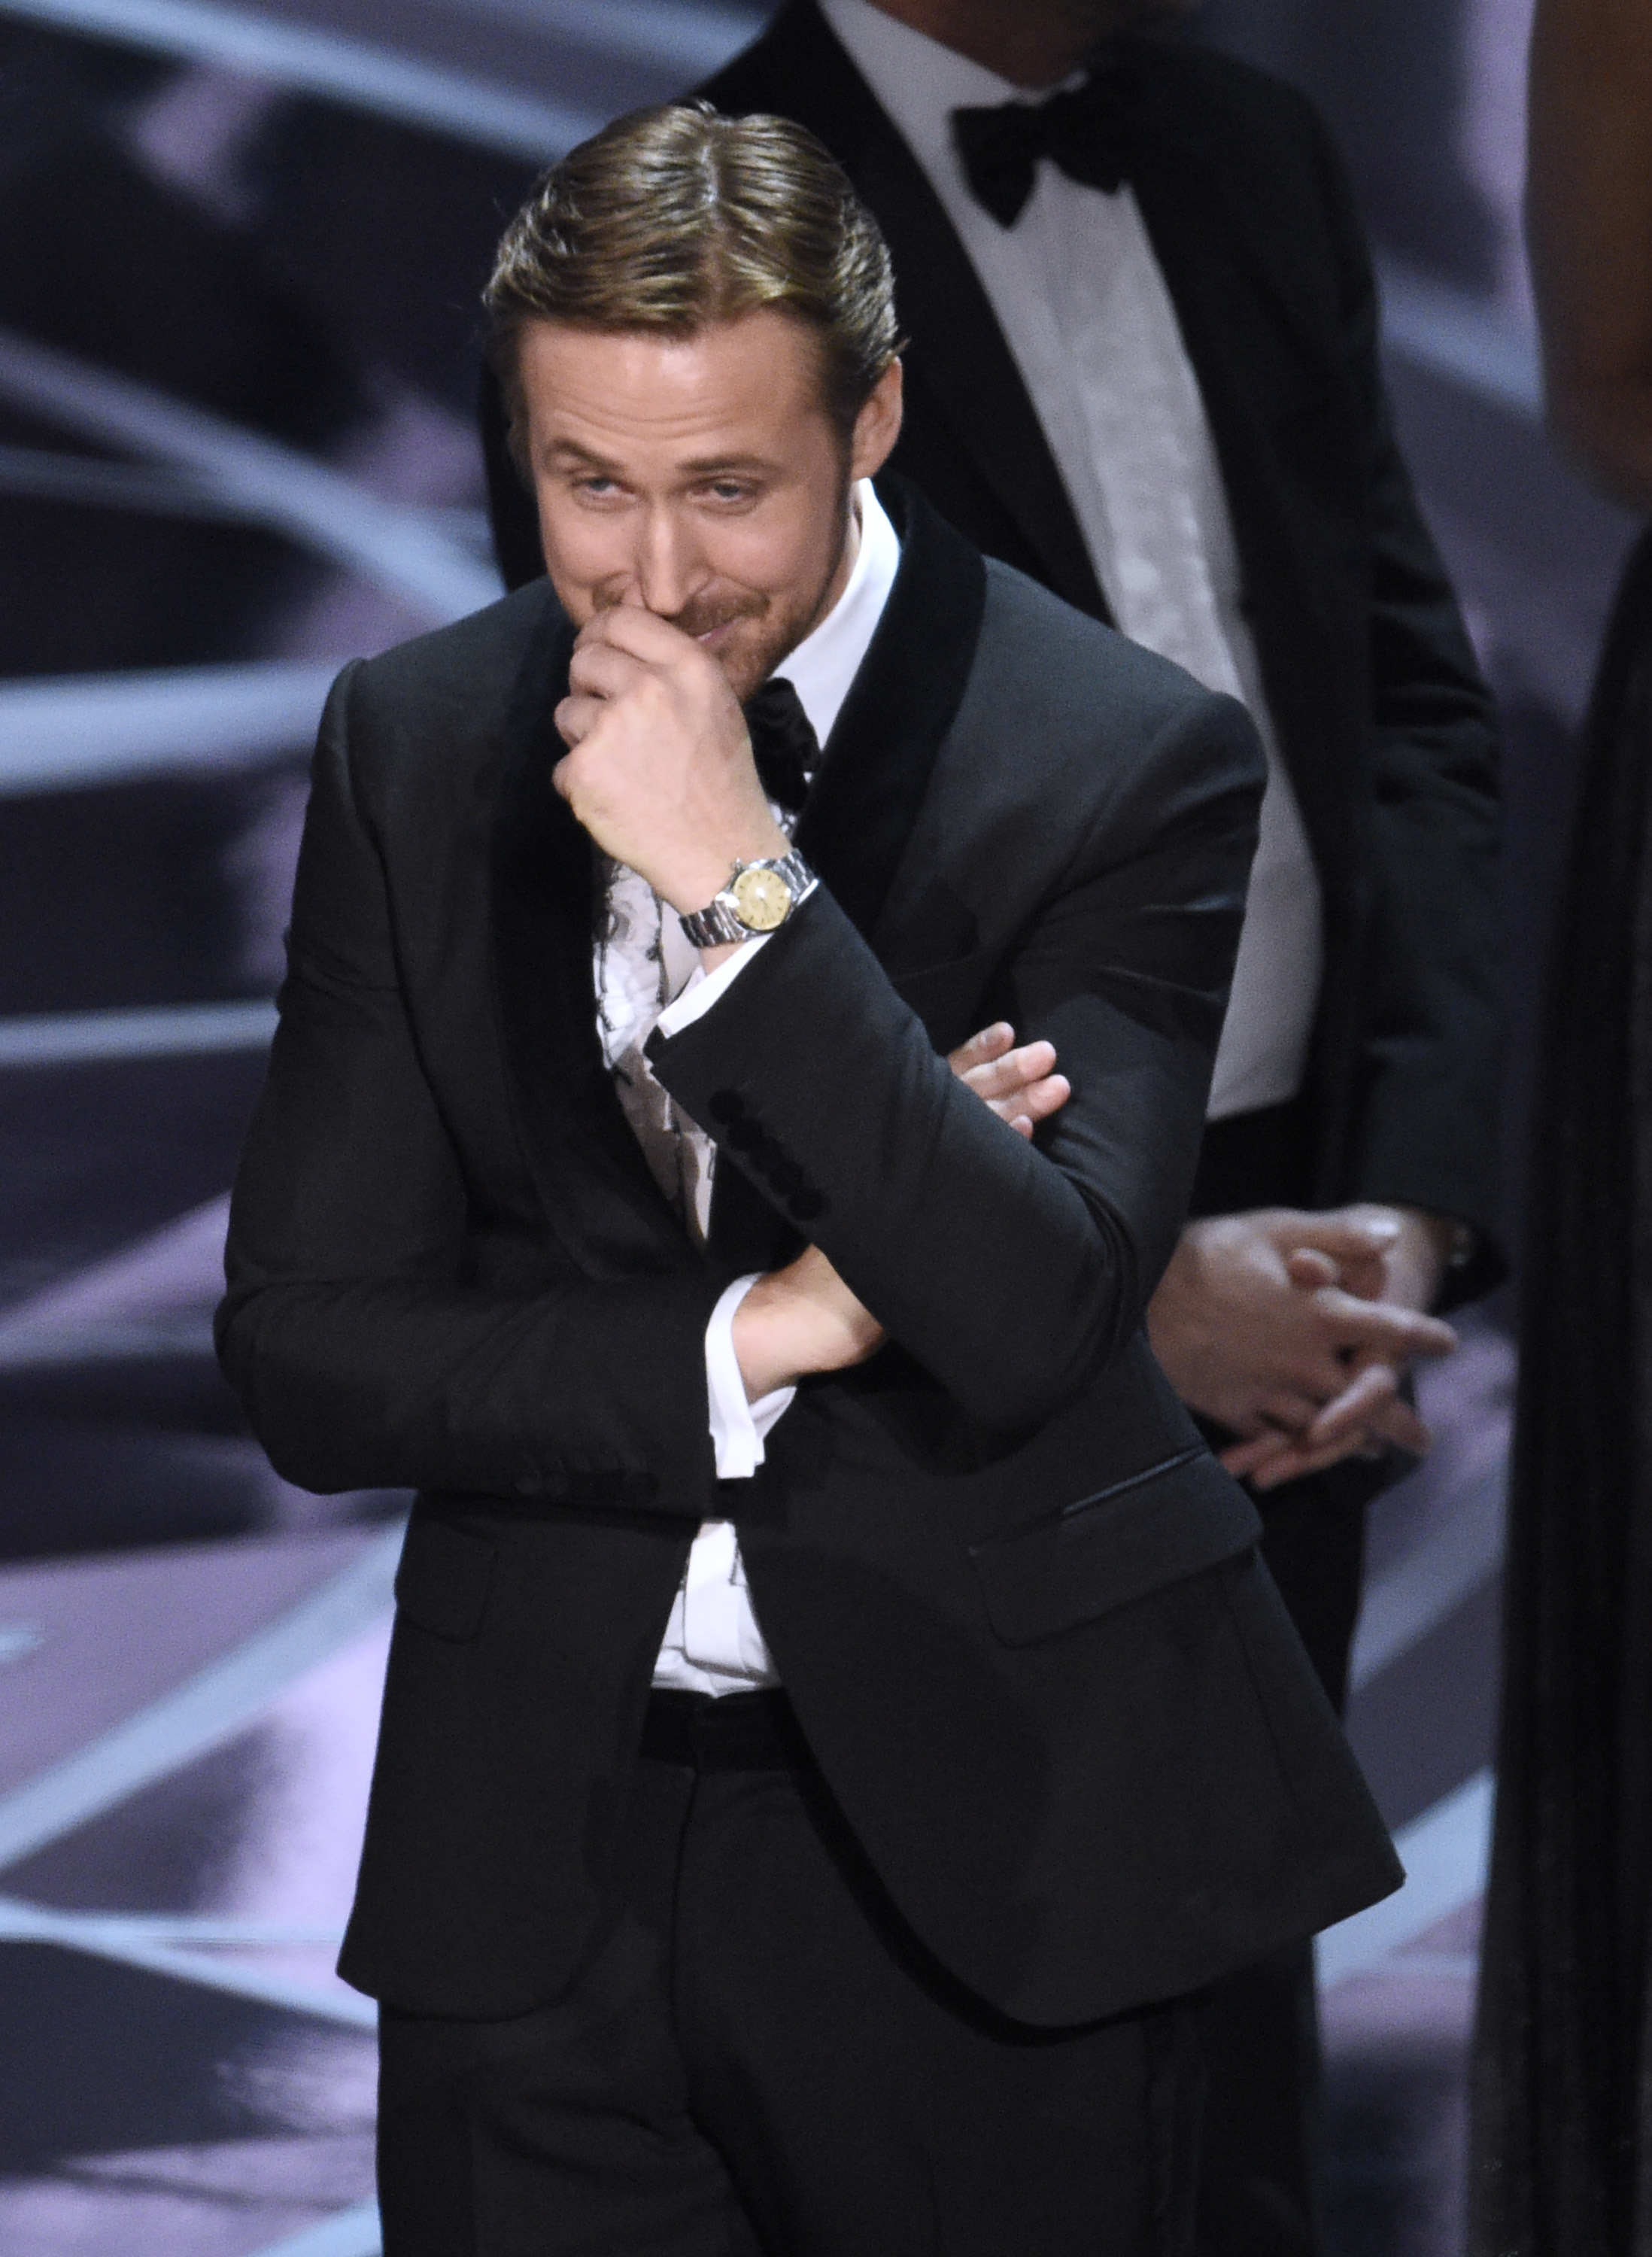 Ryan Gosling reacts as the true winner of best picture is announced at the Oscars on Sunday, Feb. 26, 2017, at the Dolby Theatre in Los Angeles. It was originally announced that "La La Land" won, but the winner was actually, "Moonlight." (Photo by Chris Pizzello/Invision/AP)